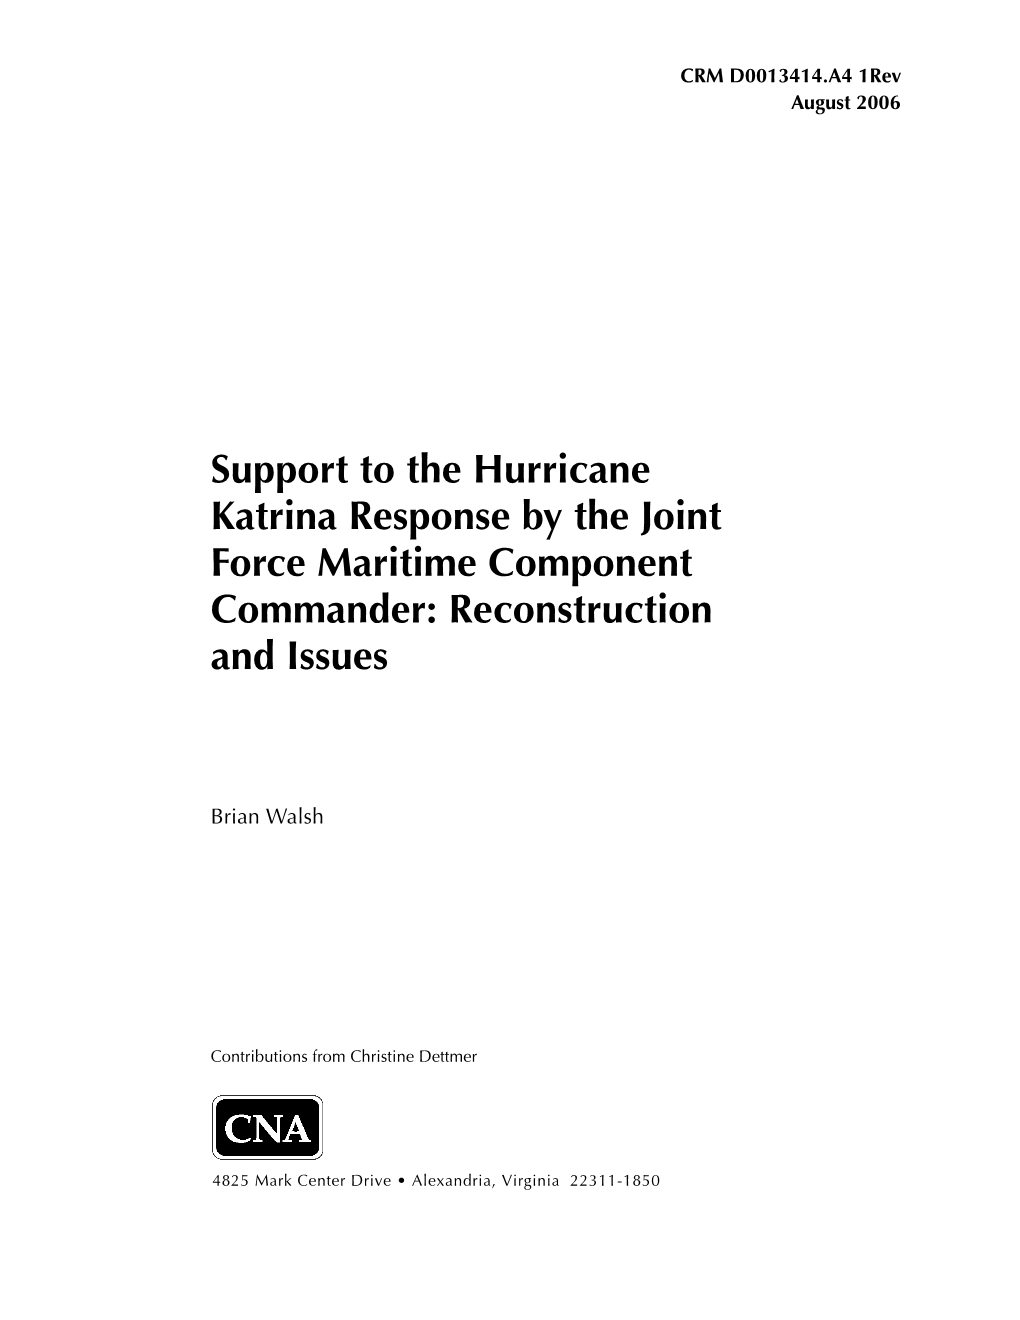 Support to the Hurricane Katrina Response by the Joint Force Maritime Component Commander: Reconstruction and Issues